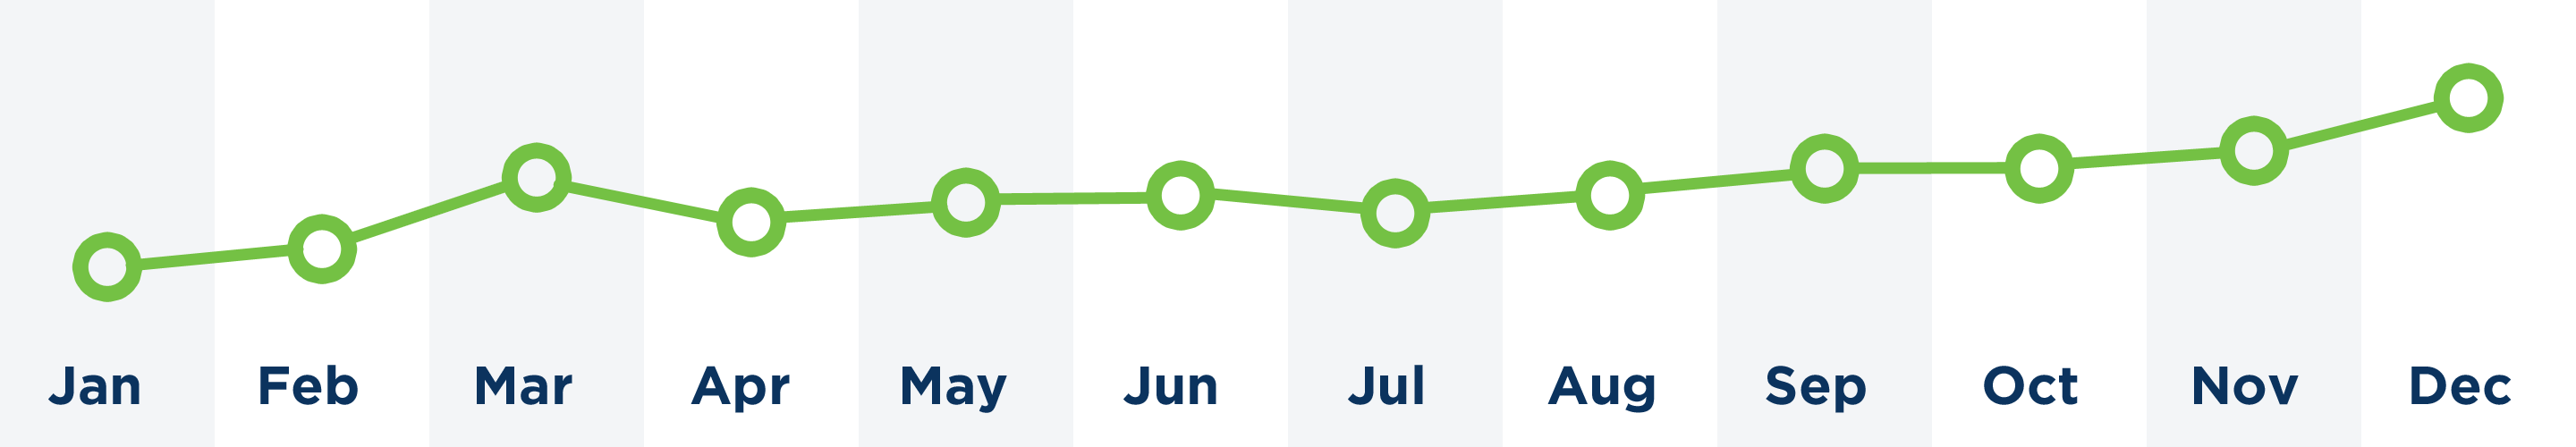 NPS score month by month